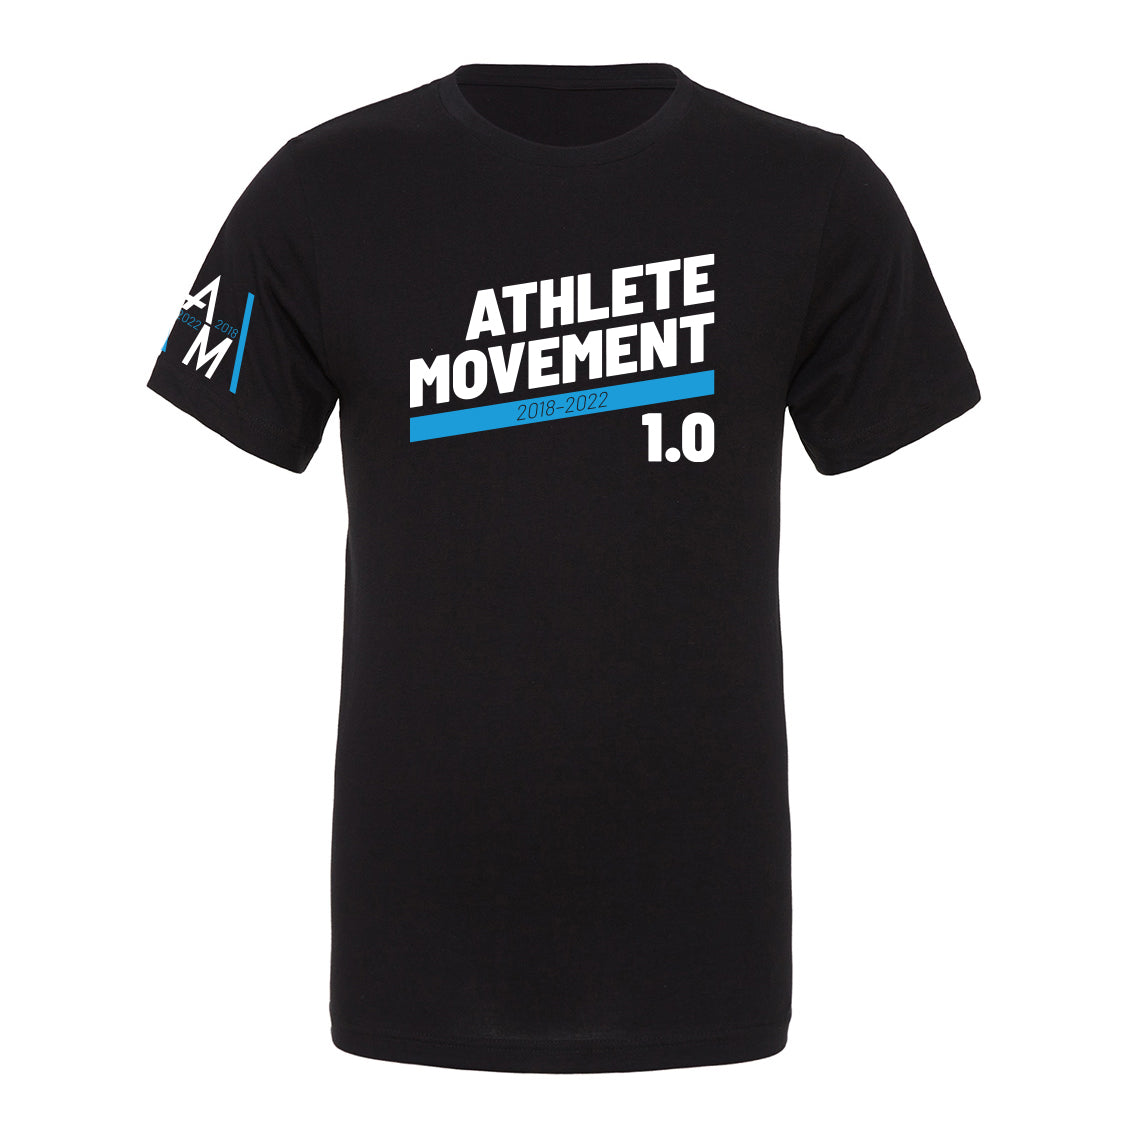 Athlete Movement - Limited Edition T Shirt